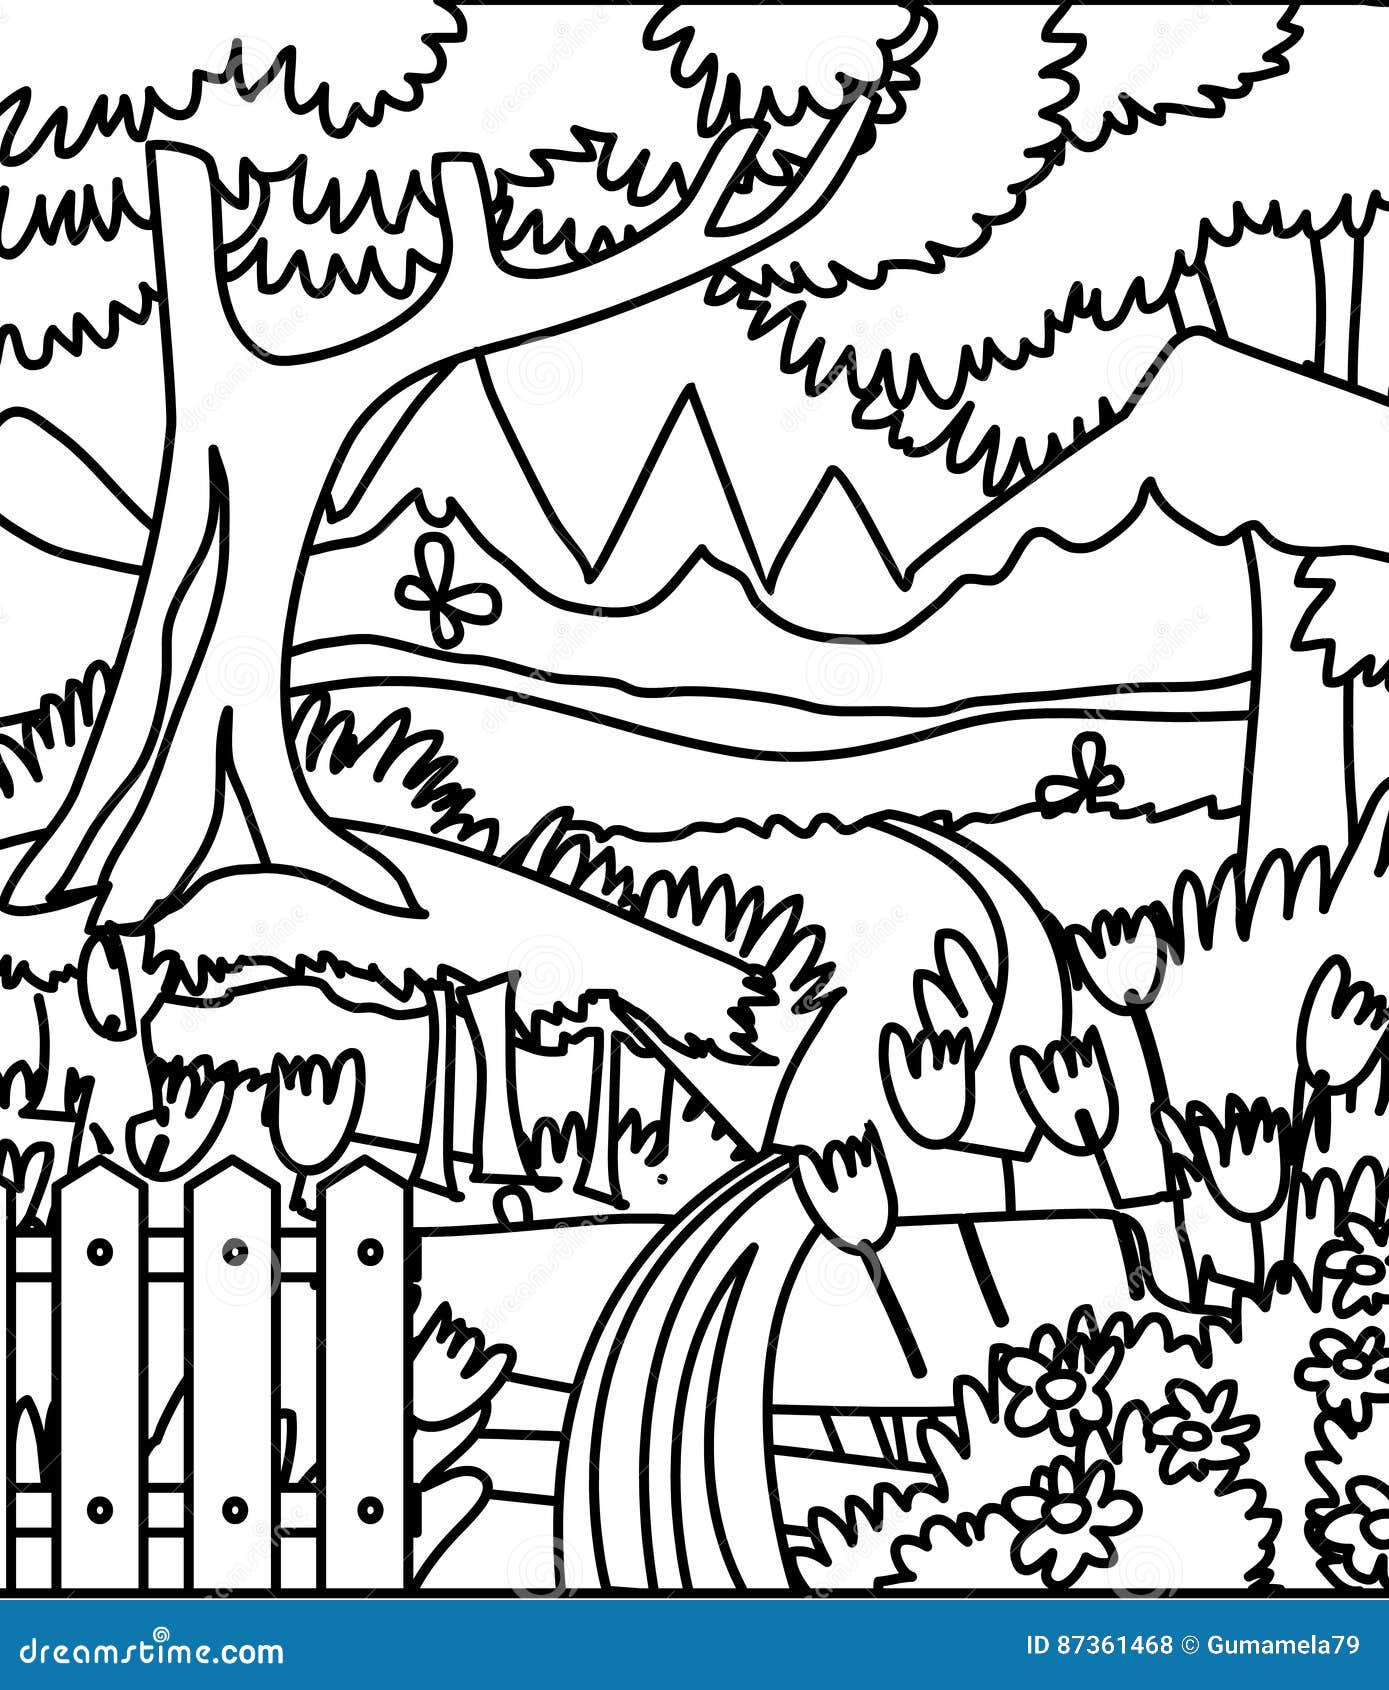 Forest Coloring Page Stock Illustration Illustration Of Coloring 87361468